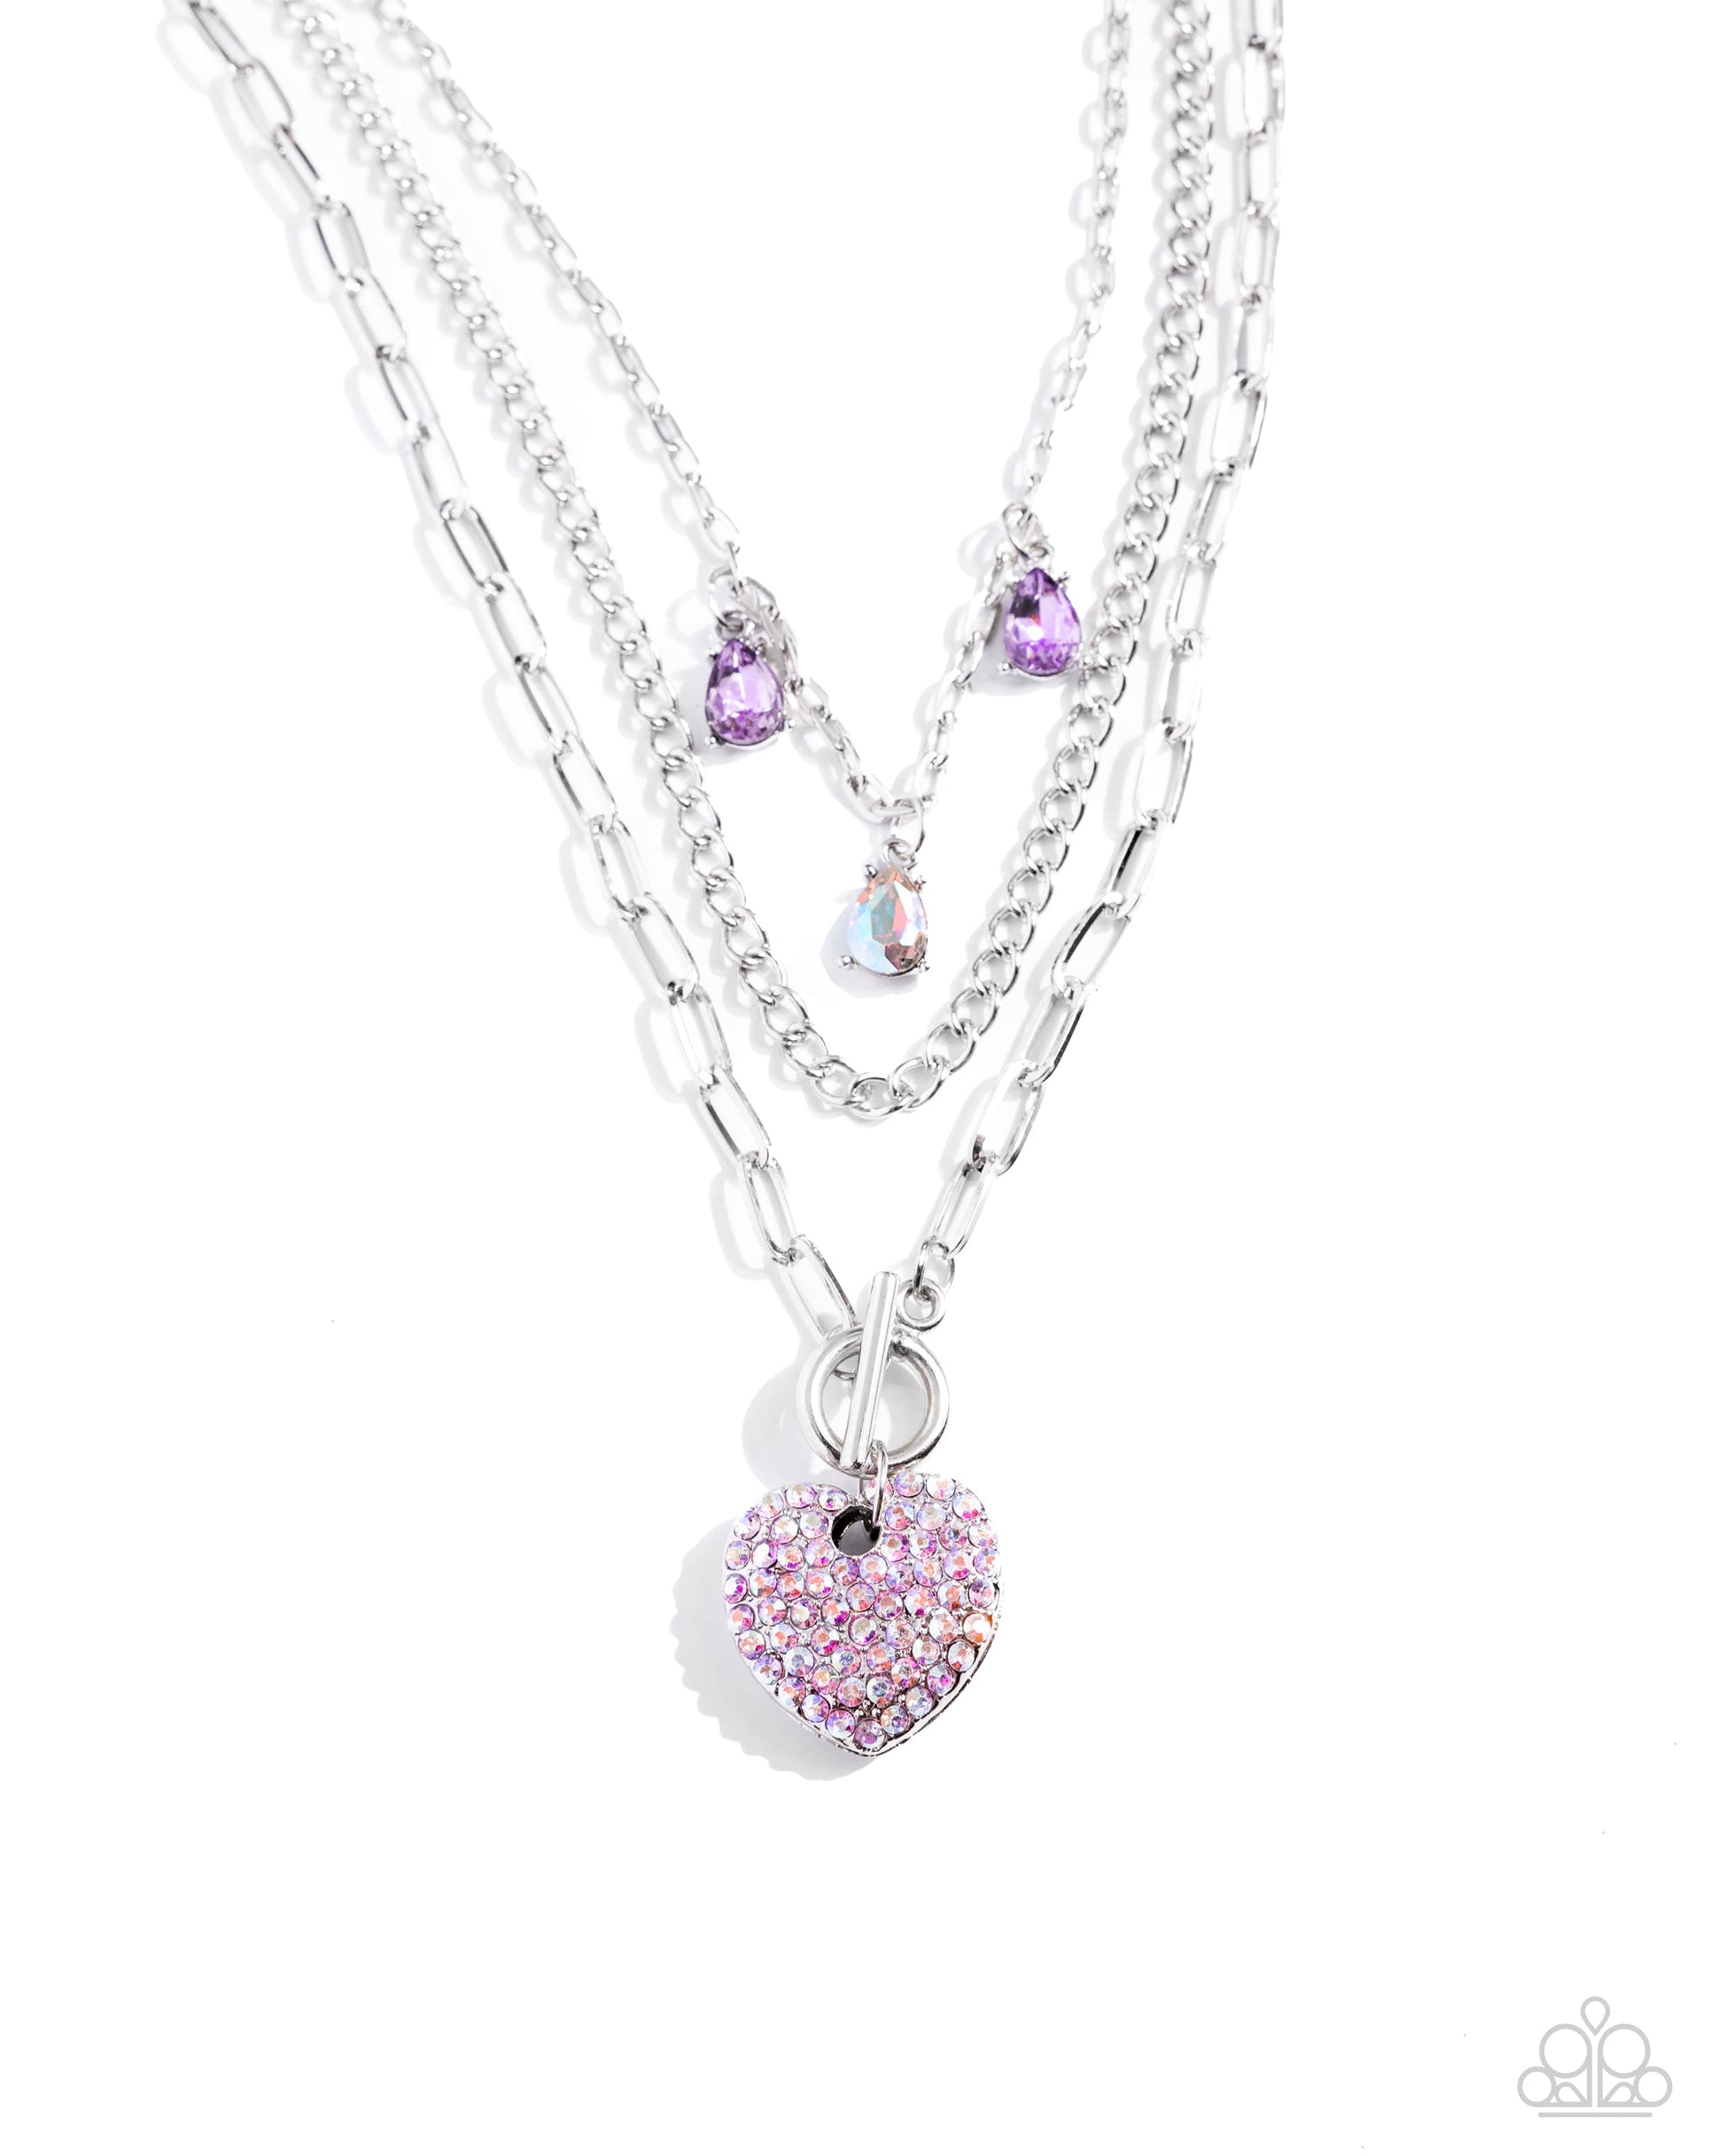 HEART History - Purple Necklace - Paparazzi Accessories - Three mismatched silver chains layer and loop around the neckline. Two purple and an iridescent teardrop gem in silver-pronged fittings dangle from the uppermost chain while a lavender iridescent-rhinestone encrusted heart pendant loops through the lowermost chain for a radiantly, romantic statement.